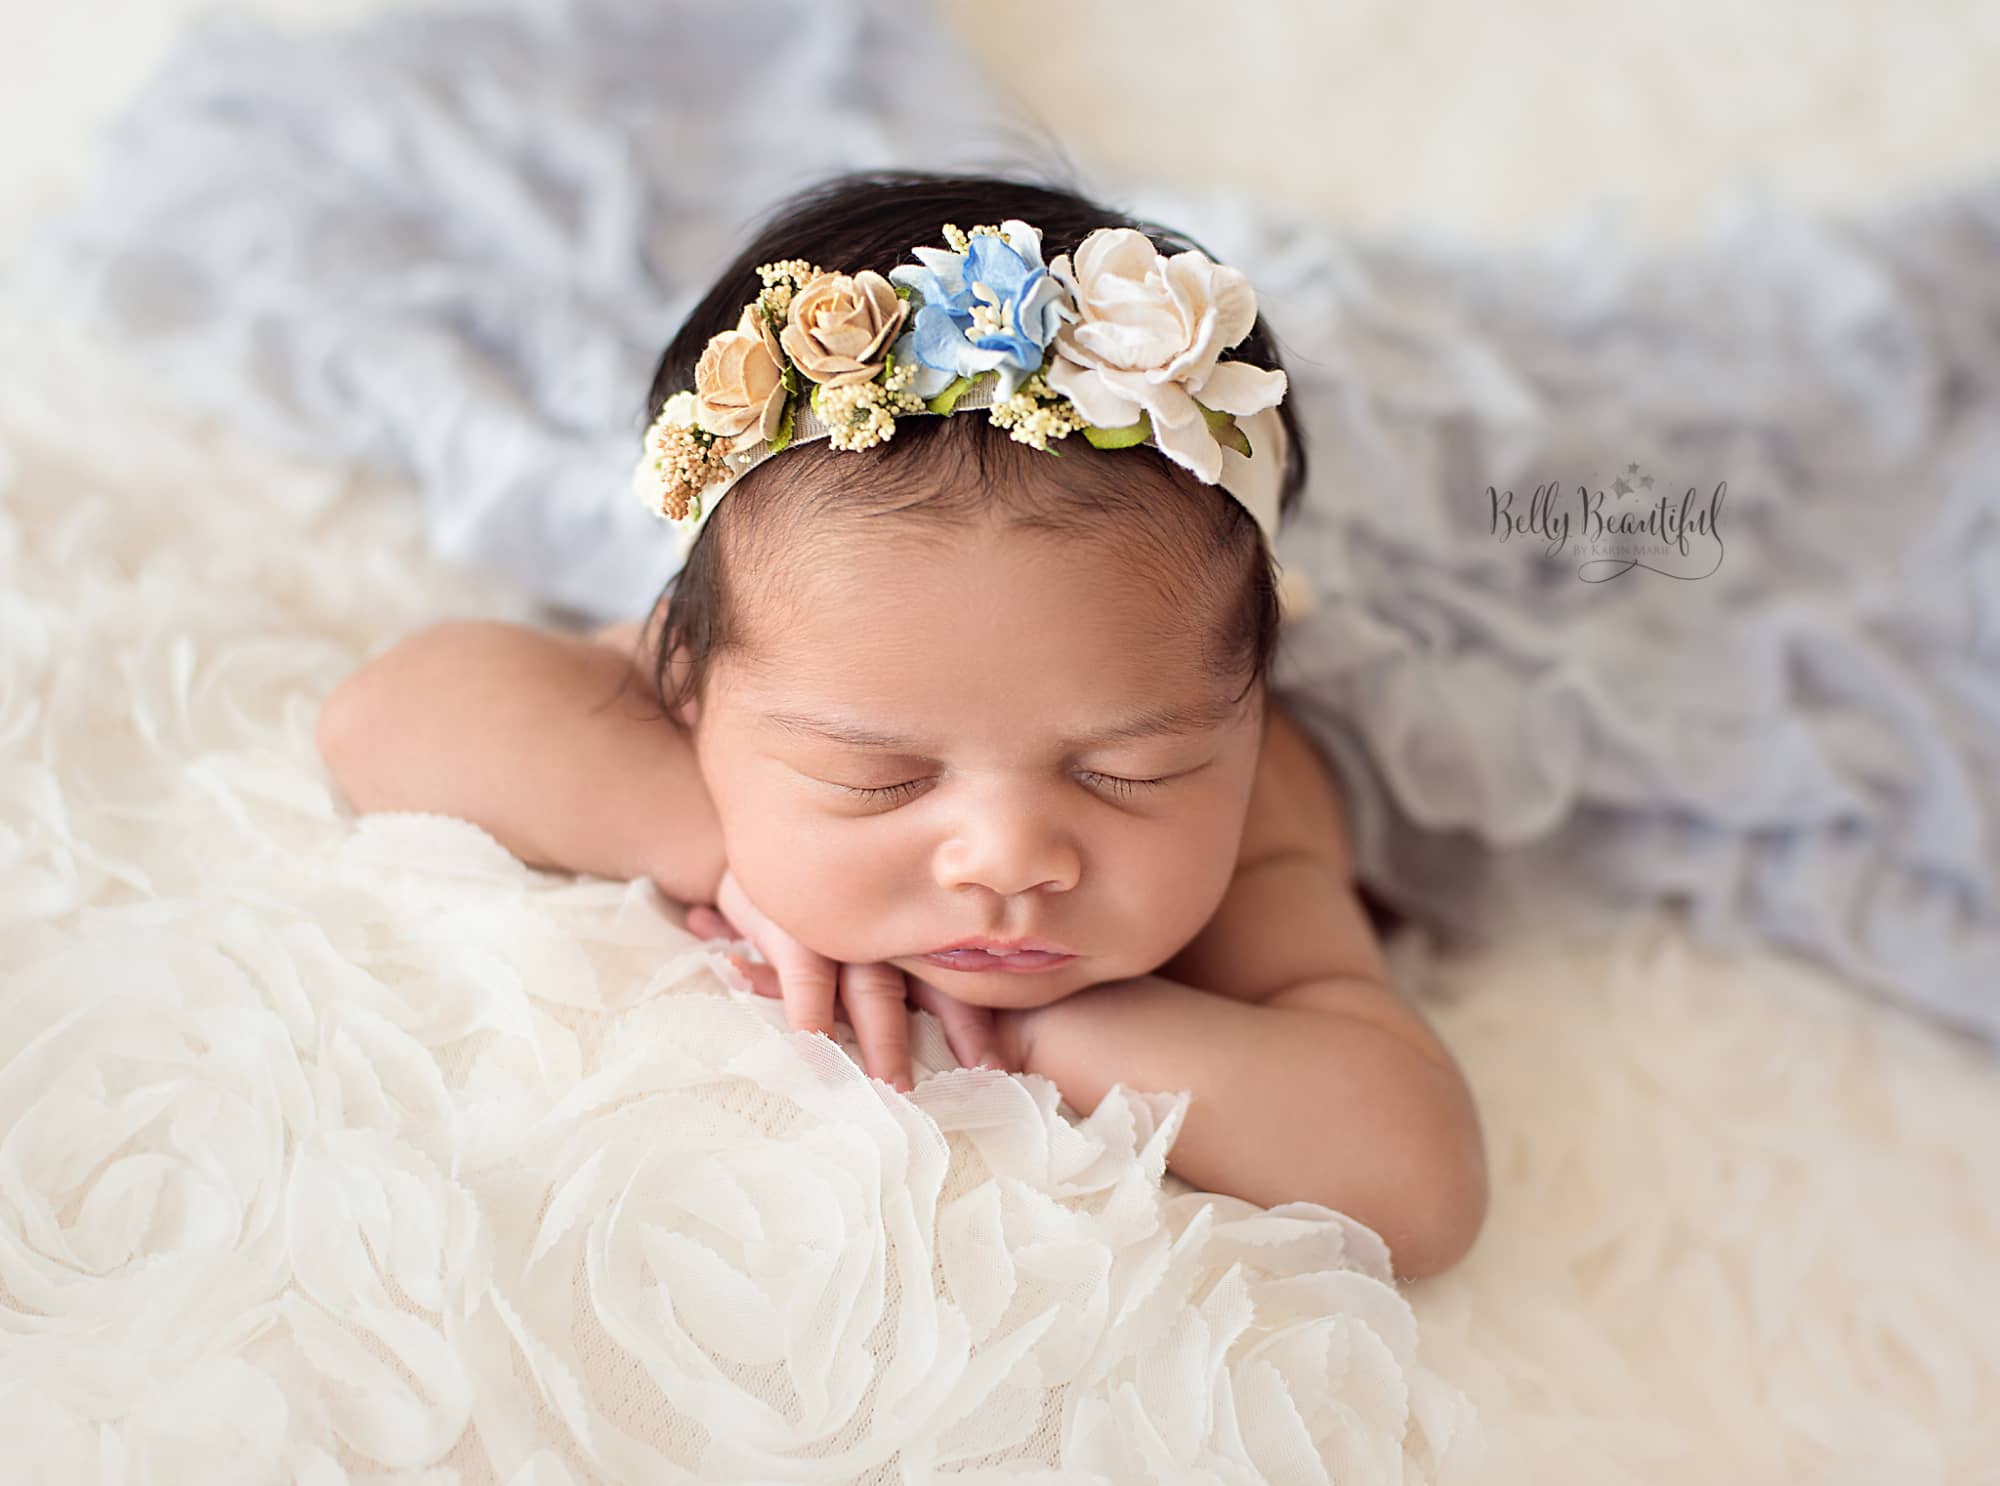 Adorable Examples of Newborn Photography to Get You Through the Week